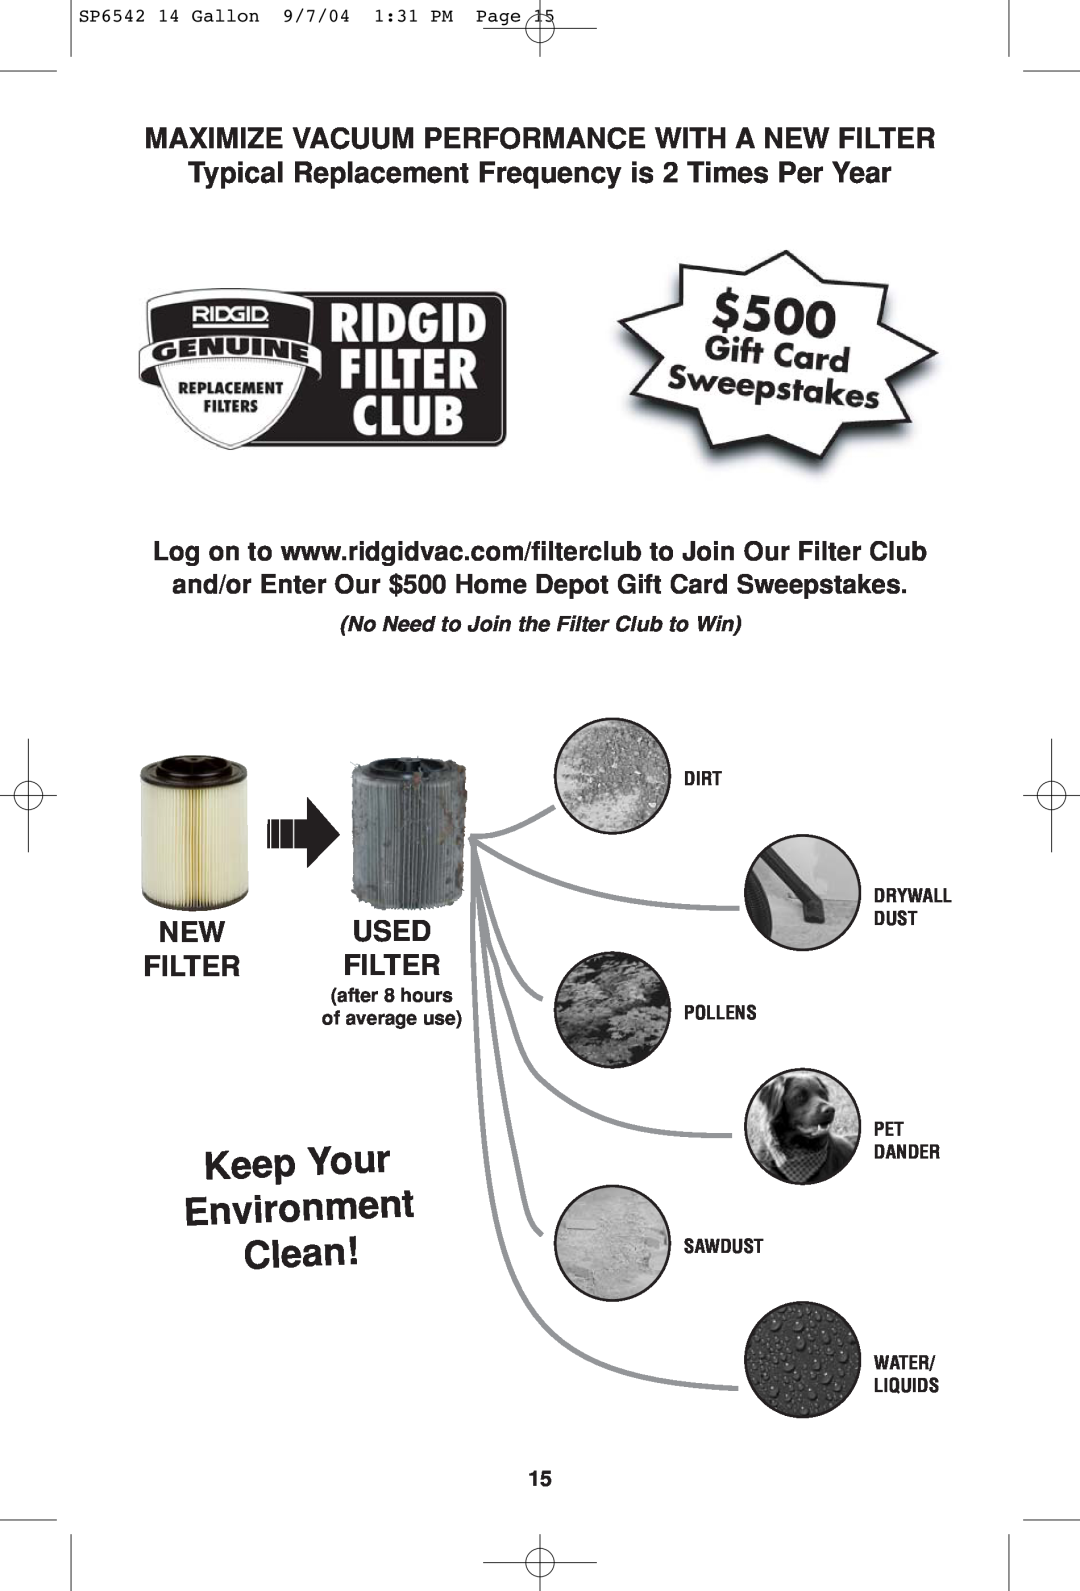 RIDGID WD1450 Keep Your Environment Clean, New Used Filter Filter, No Need to Join the Filter Club to Win, Water/ Liquids 